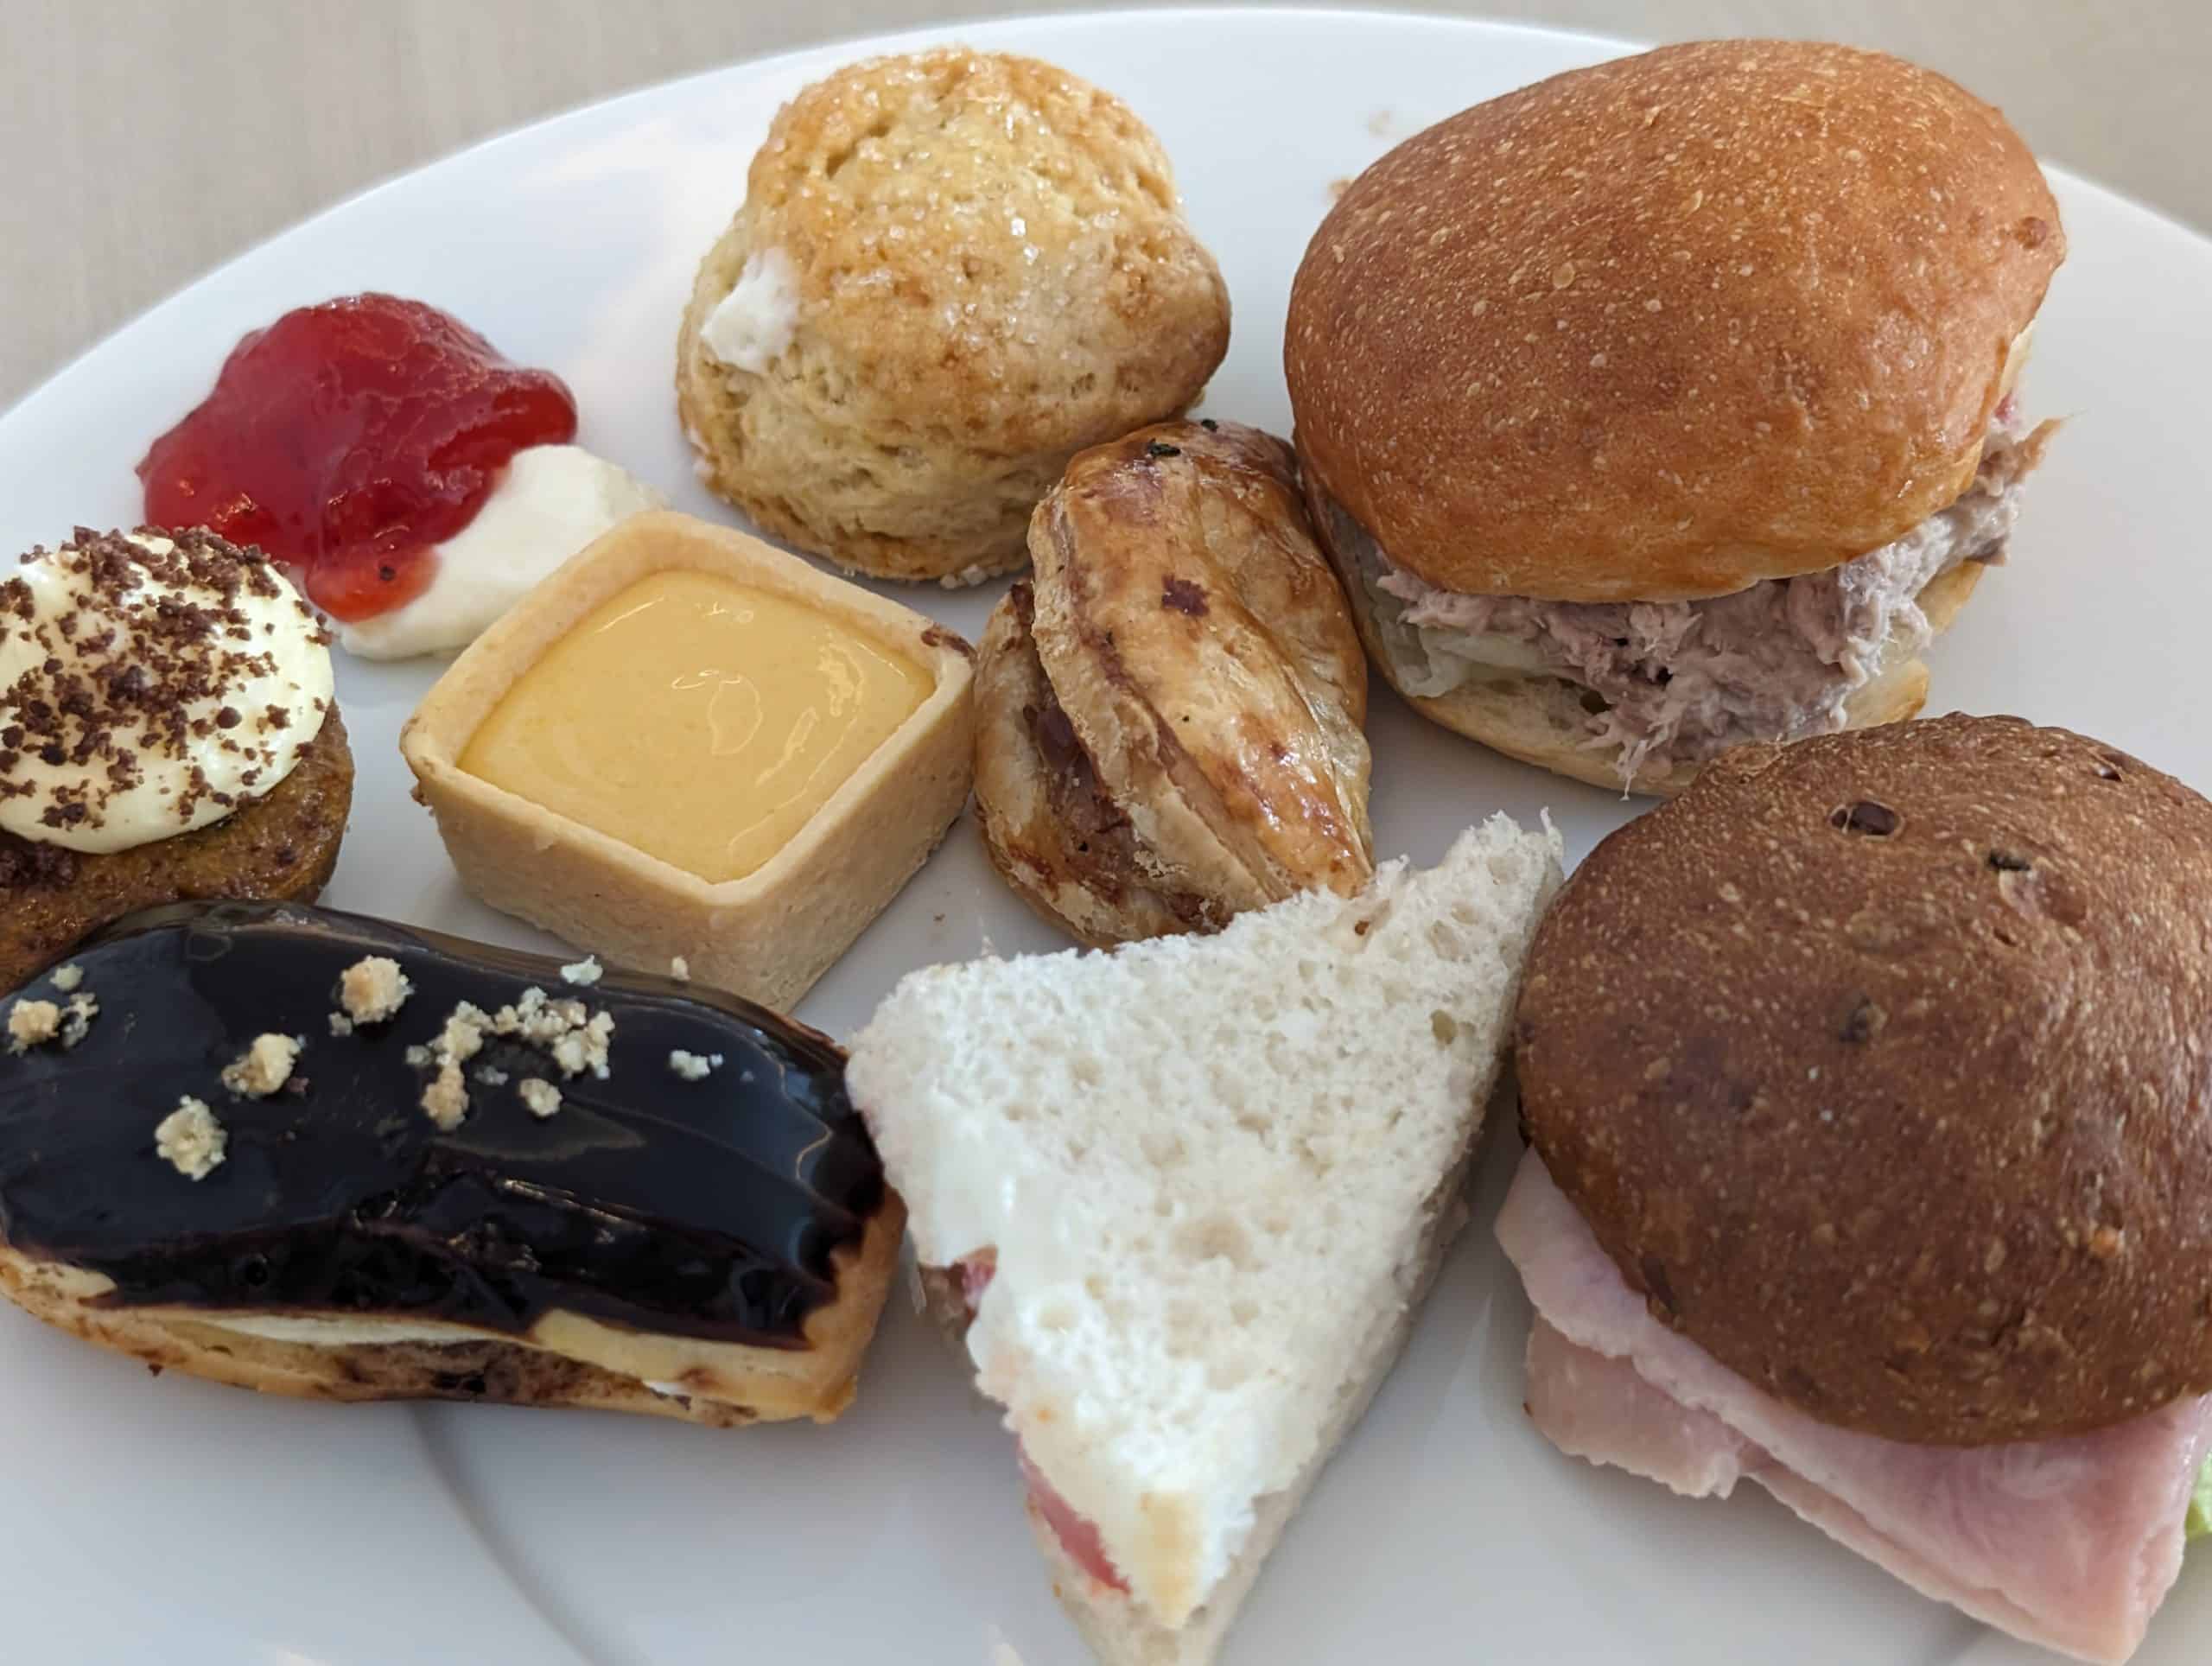 Assorted Afternoon Tea Snacks - both sweet and savory